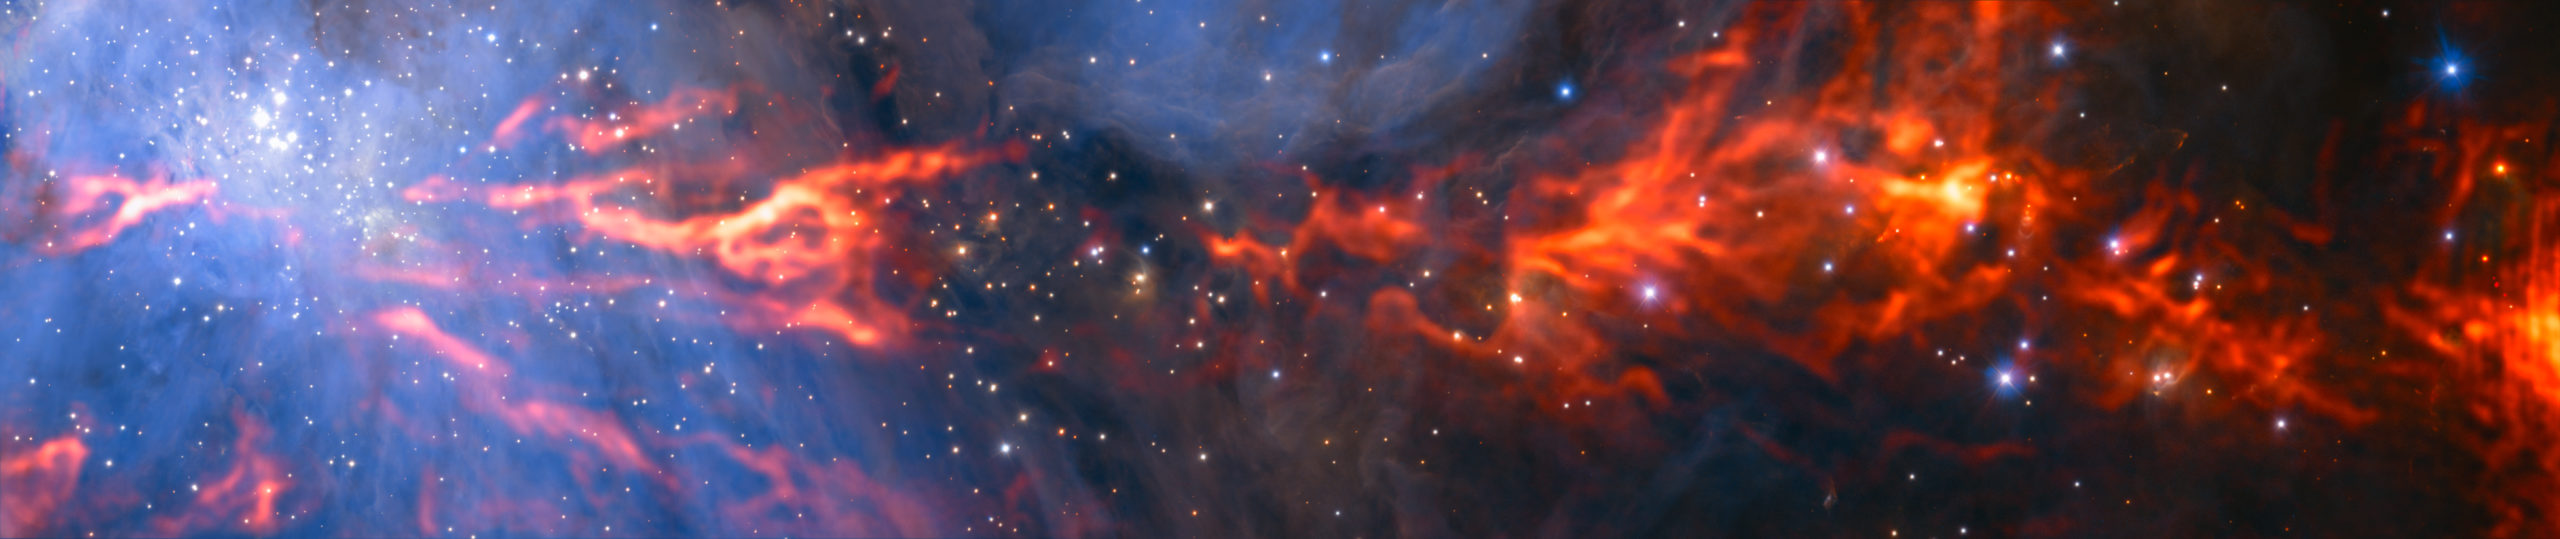 New Observations Reveal A Dramatic Web Structure Inside The Orion Nebula